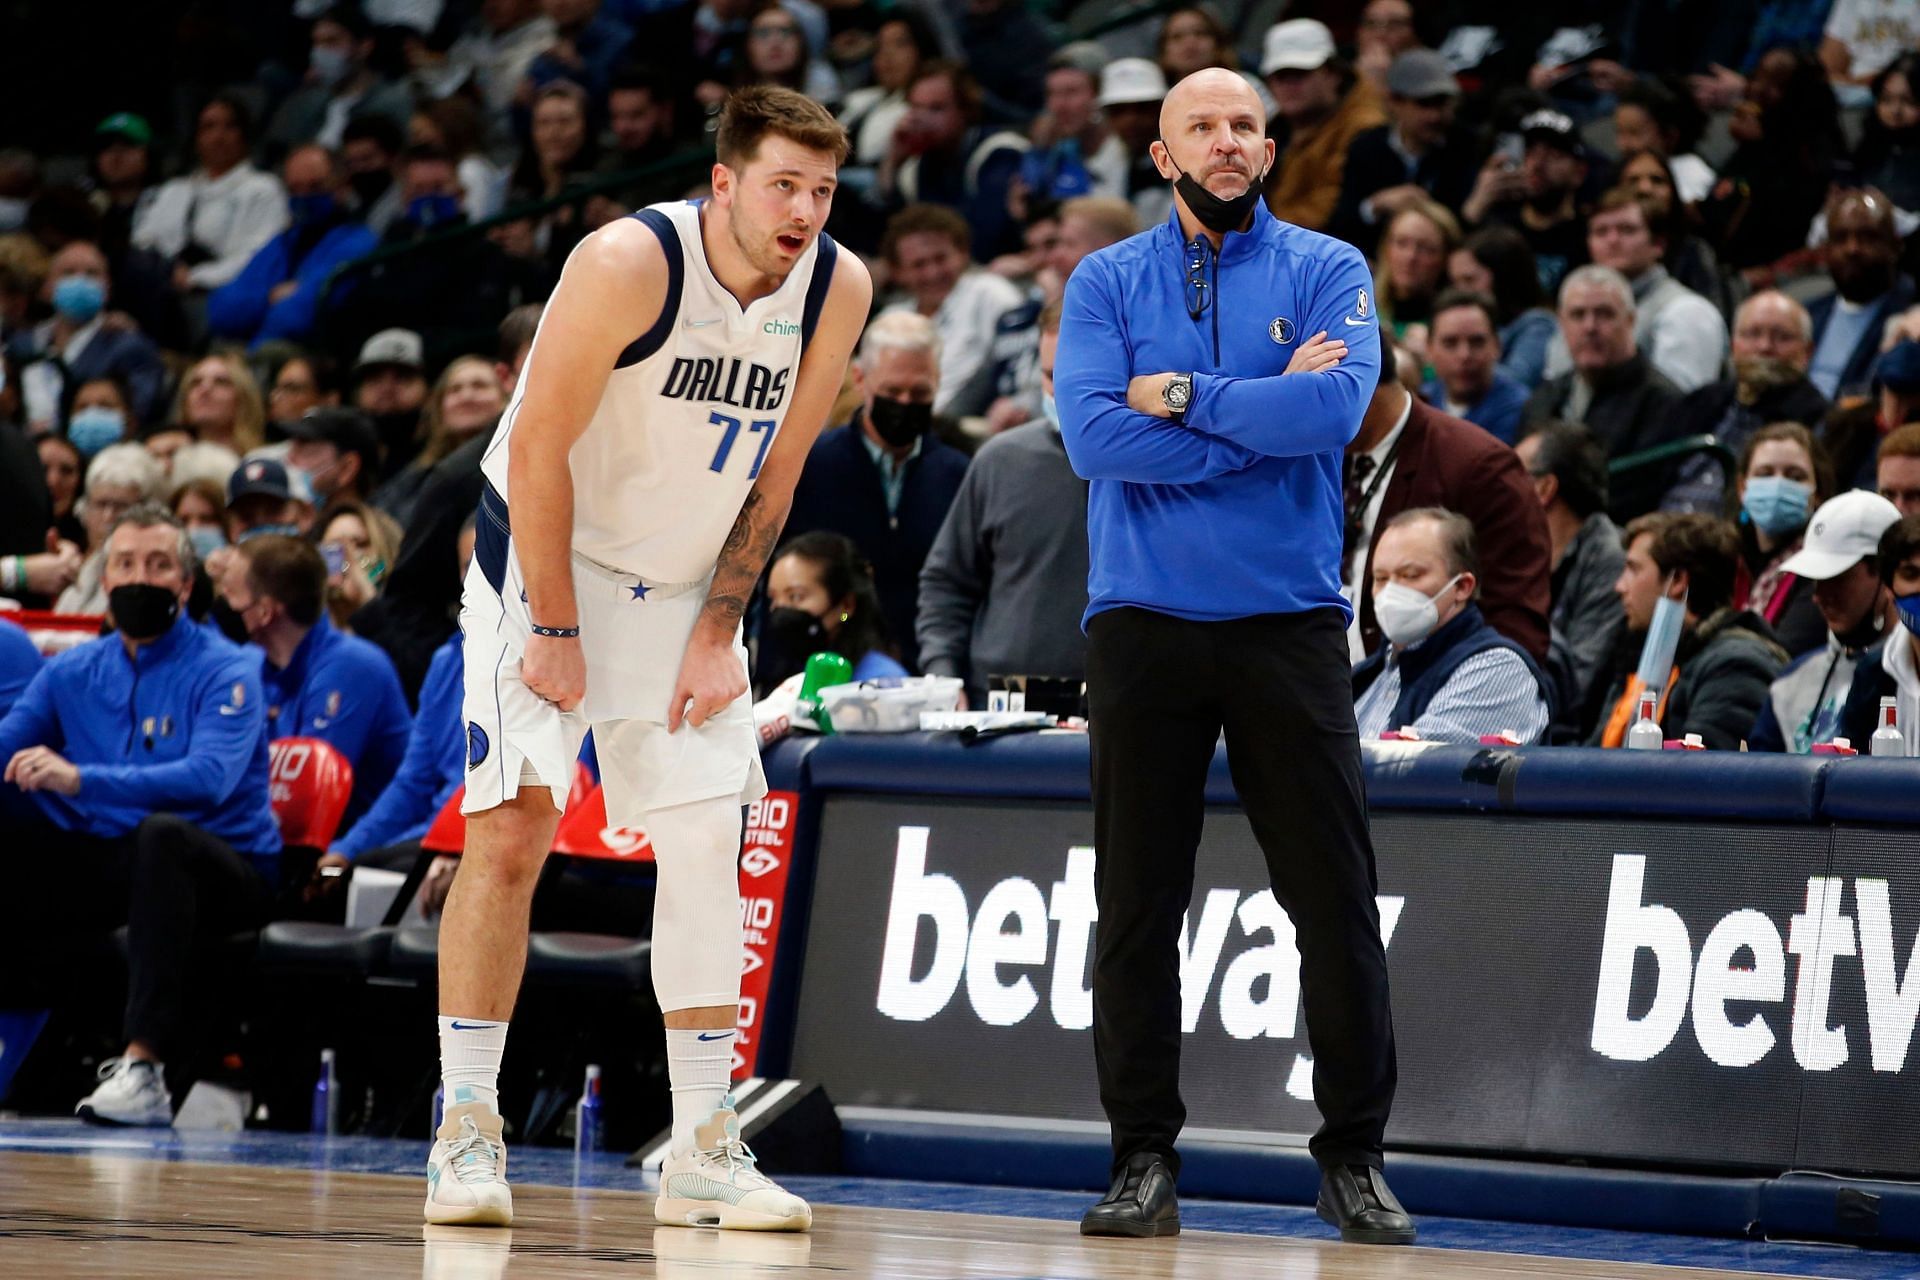 Luka Doncic and Jason Kidd watch on during a game.